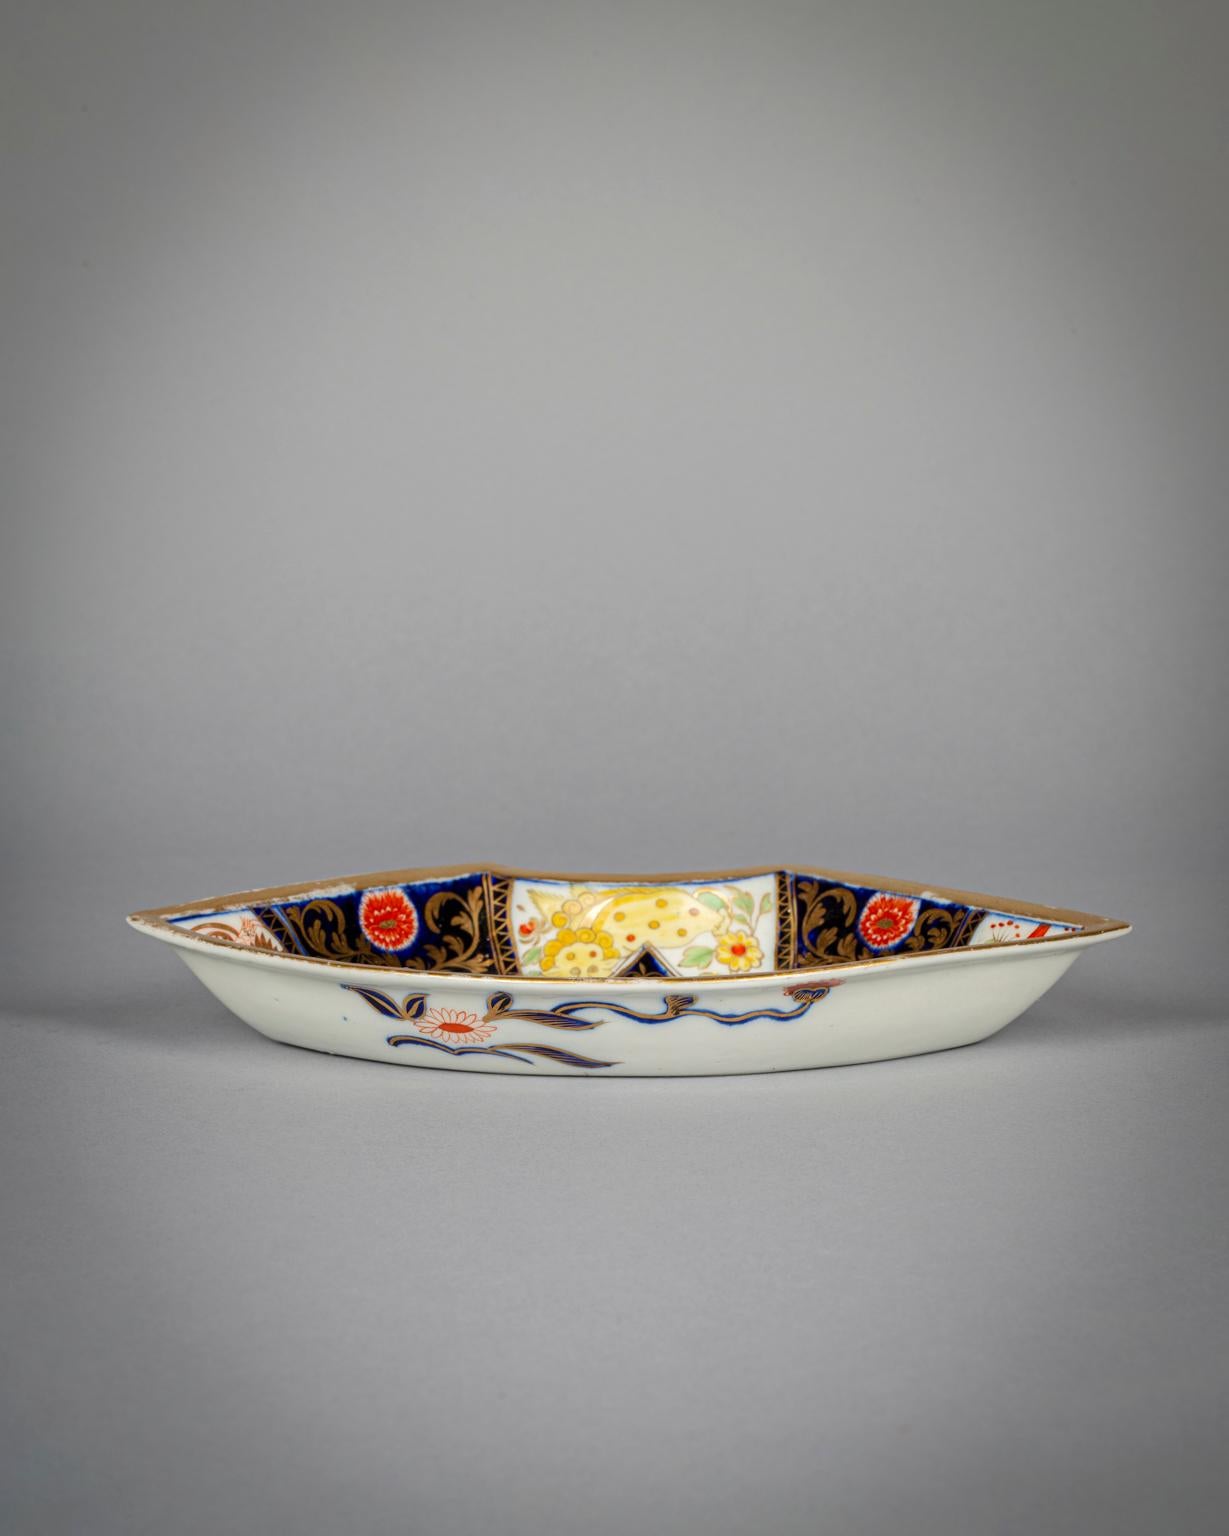 English Porcelain Five-Part Serving Set on a Wooden Tray, circa 1830 For Sale 3